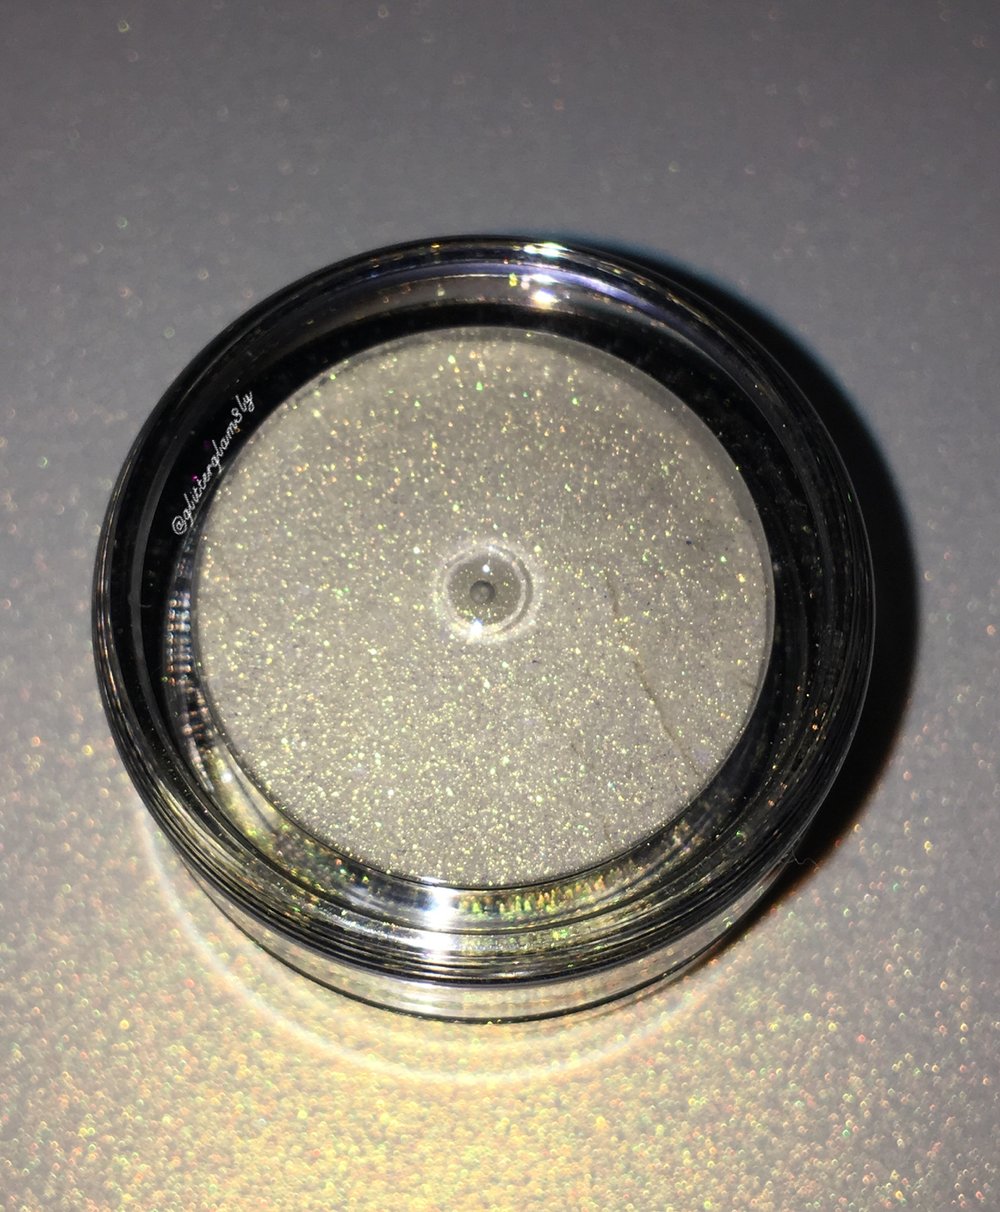 Image of "Angel Dust" Loose Highlighter Pigment